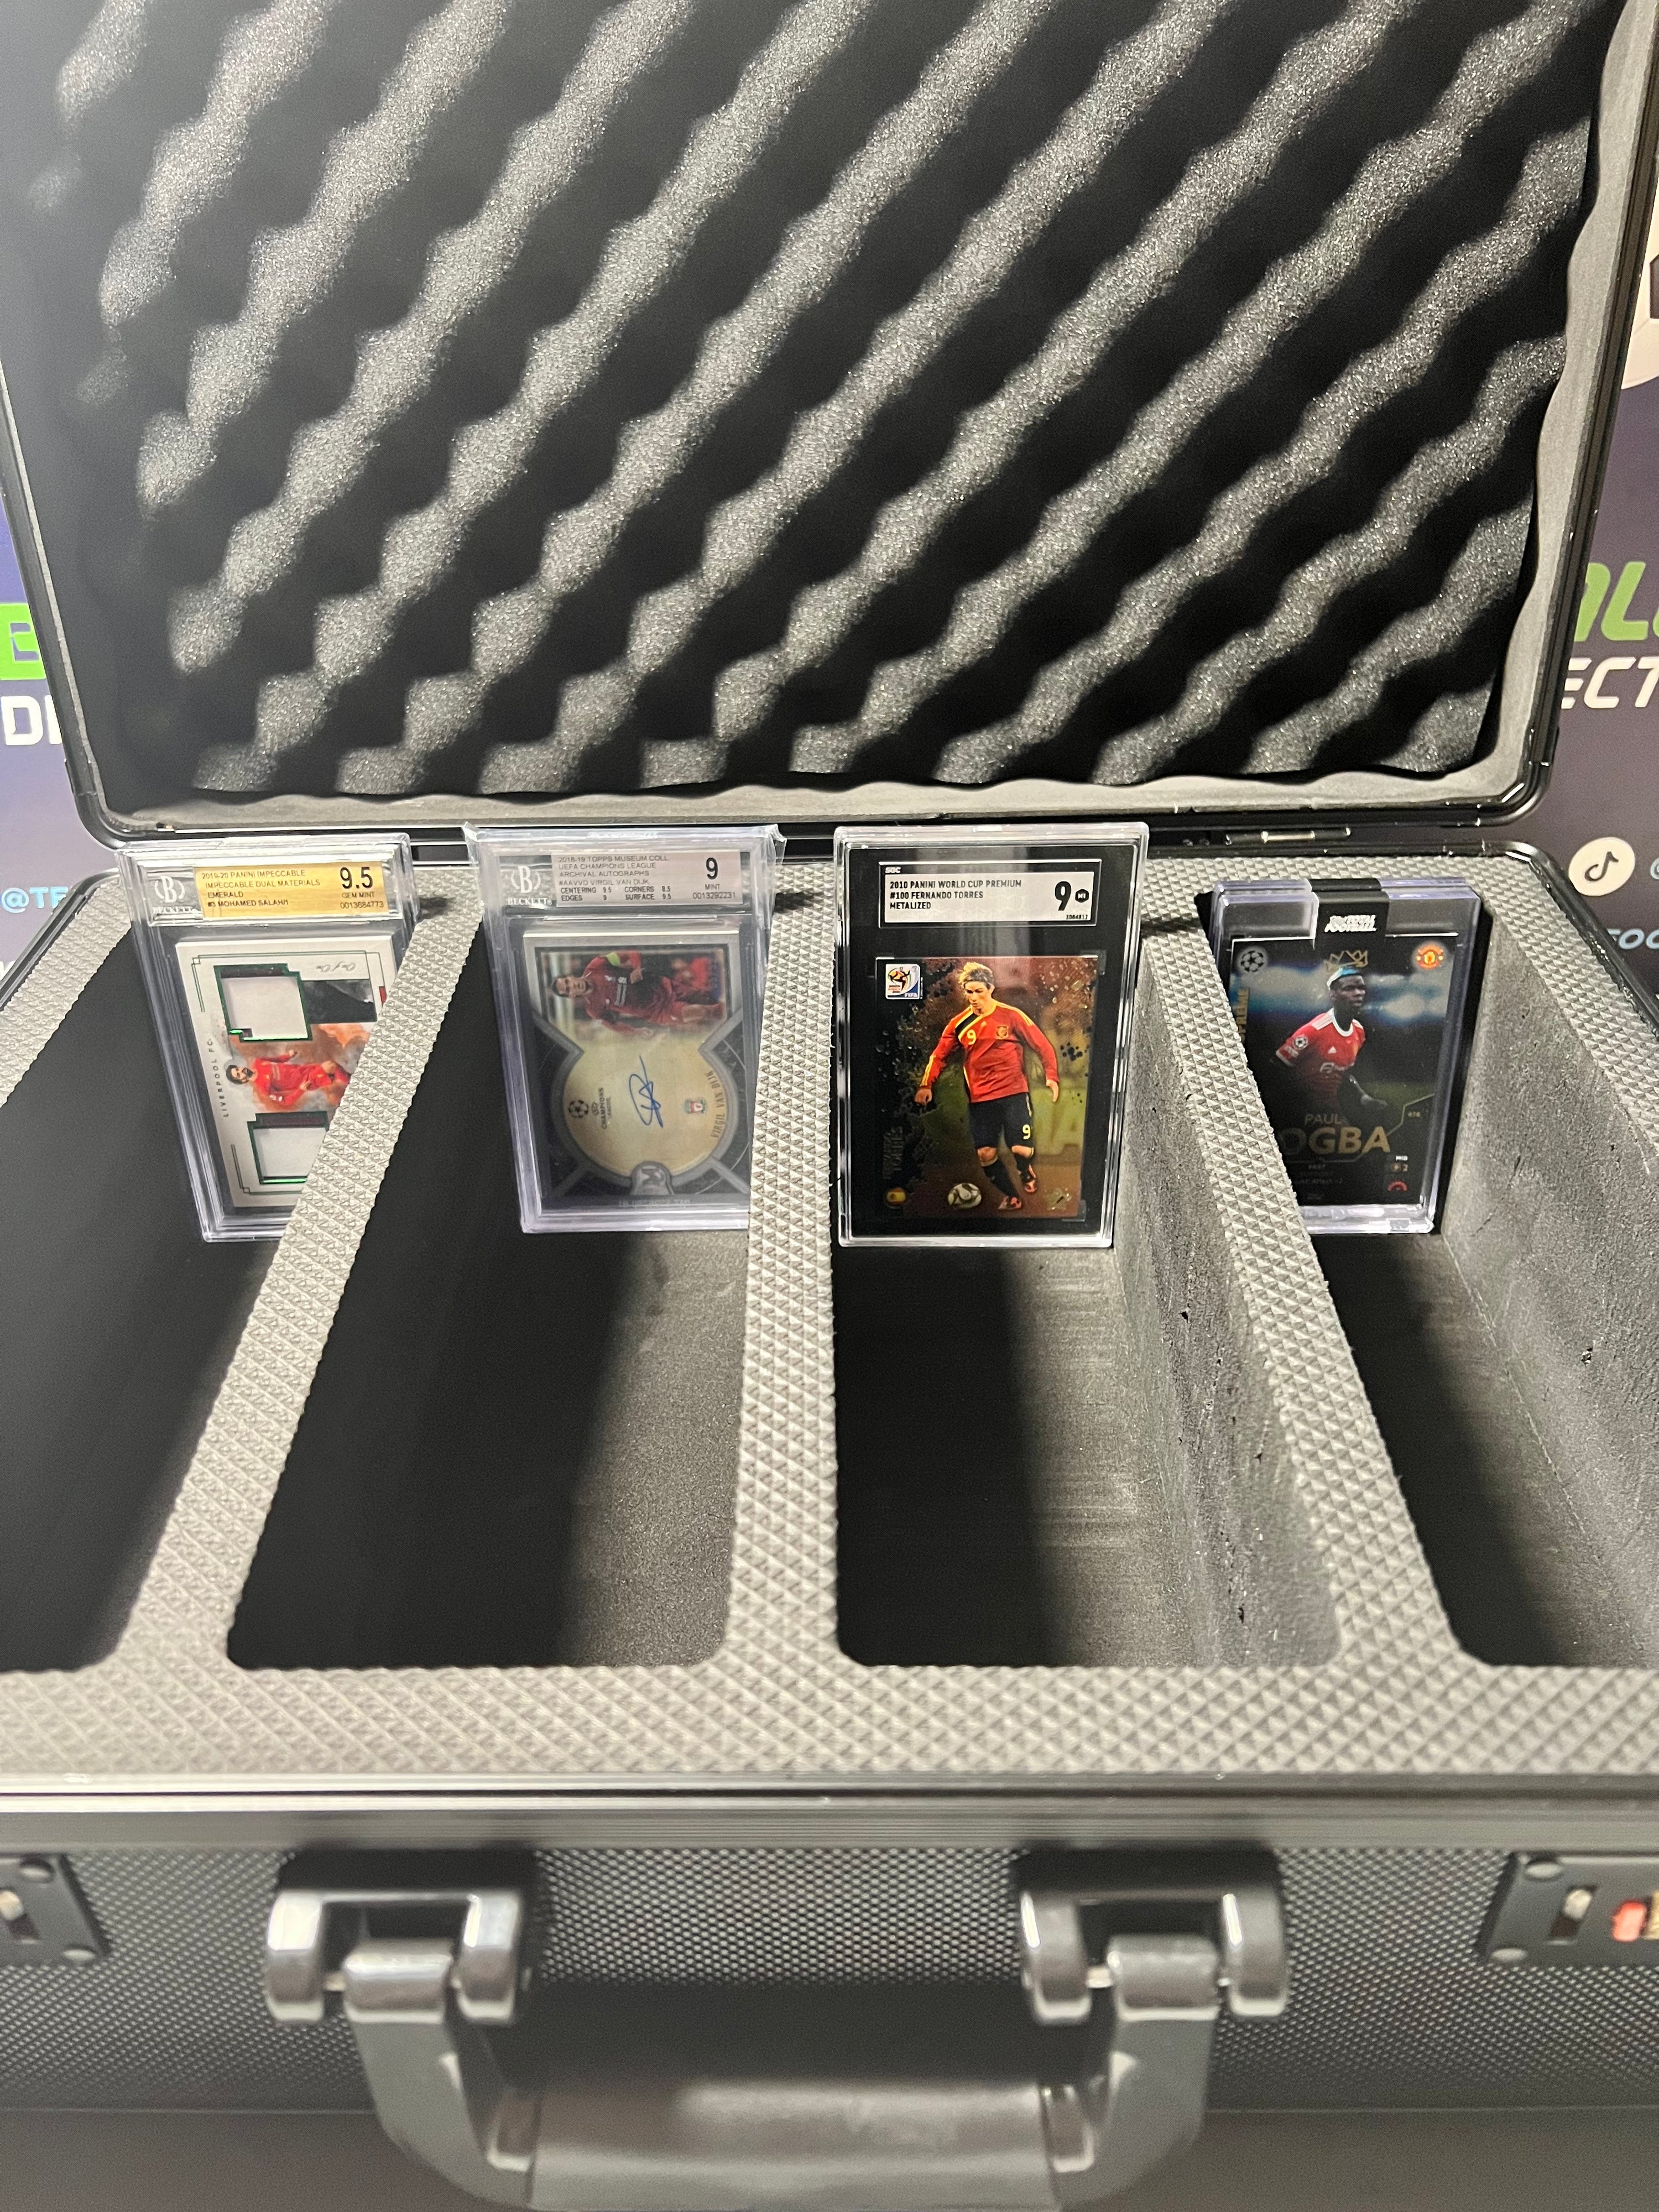 4 ROW ALUMINIUM TRADING CARD STORAGE CASE WITH NUMBER SAFETY LOCK